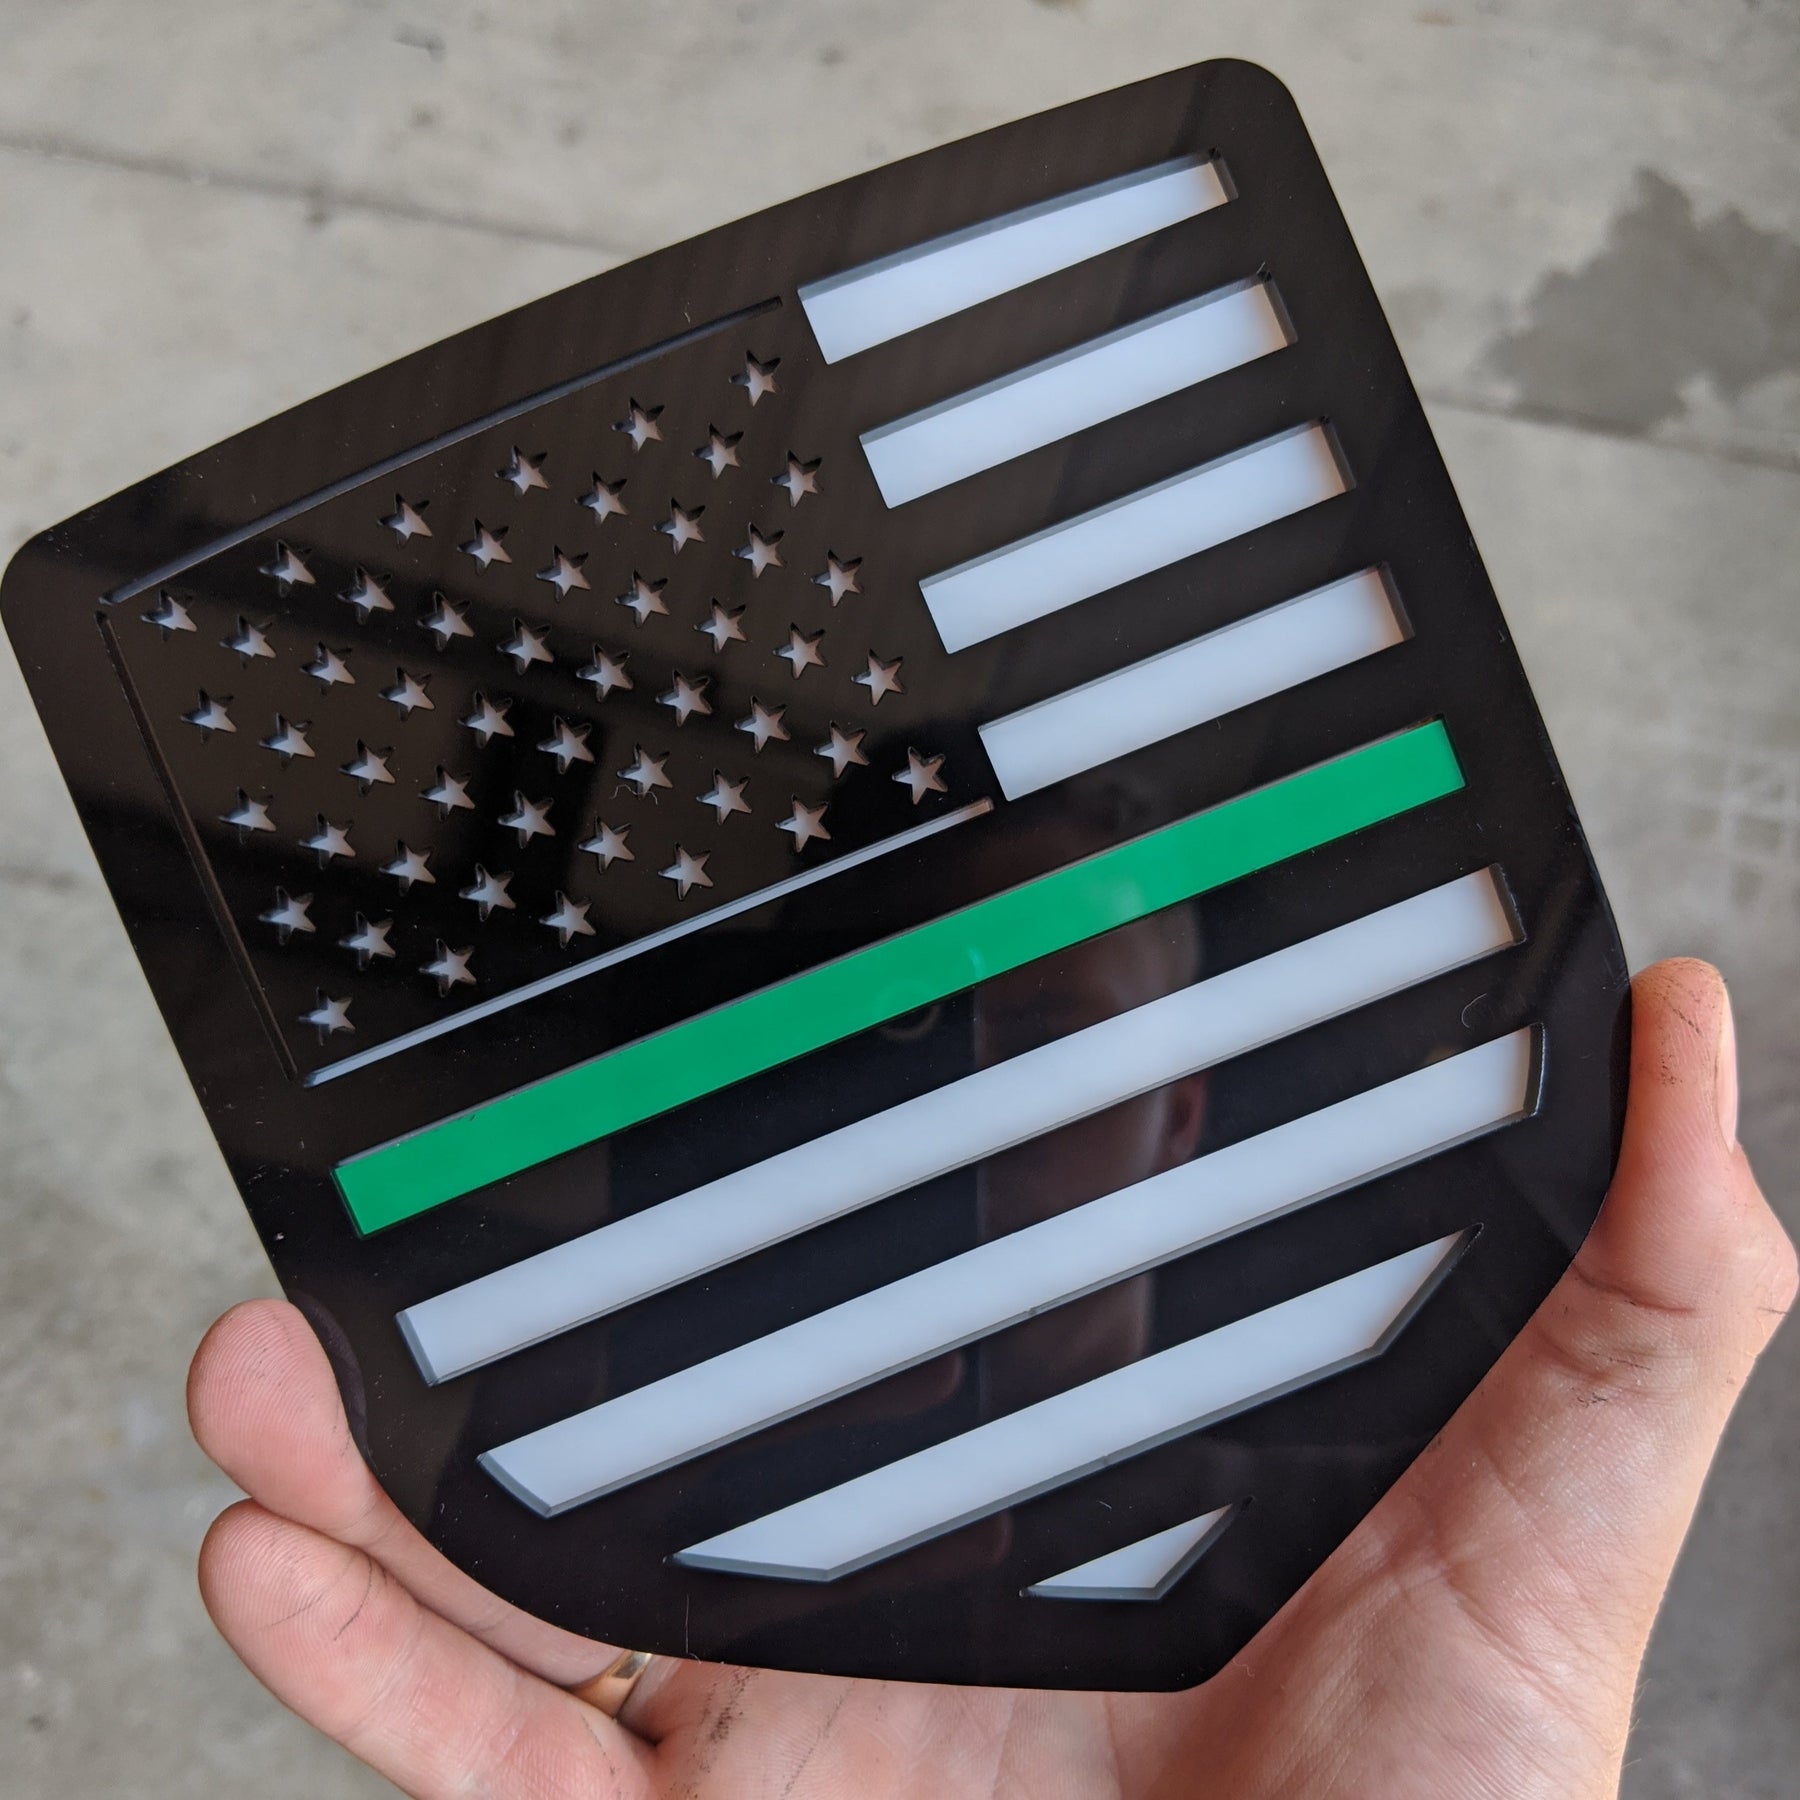 American Flag Badge - Fits 2009-2018 Dodge® Ram® Tailgate -1500, 2500, 3500 - Black on White with a Thin Green Line